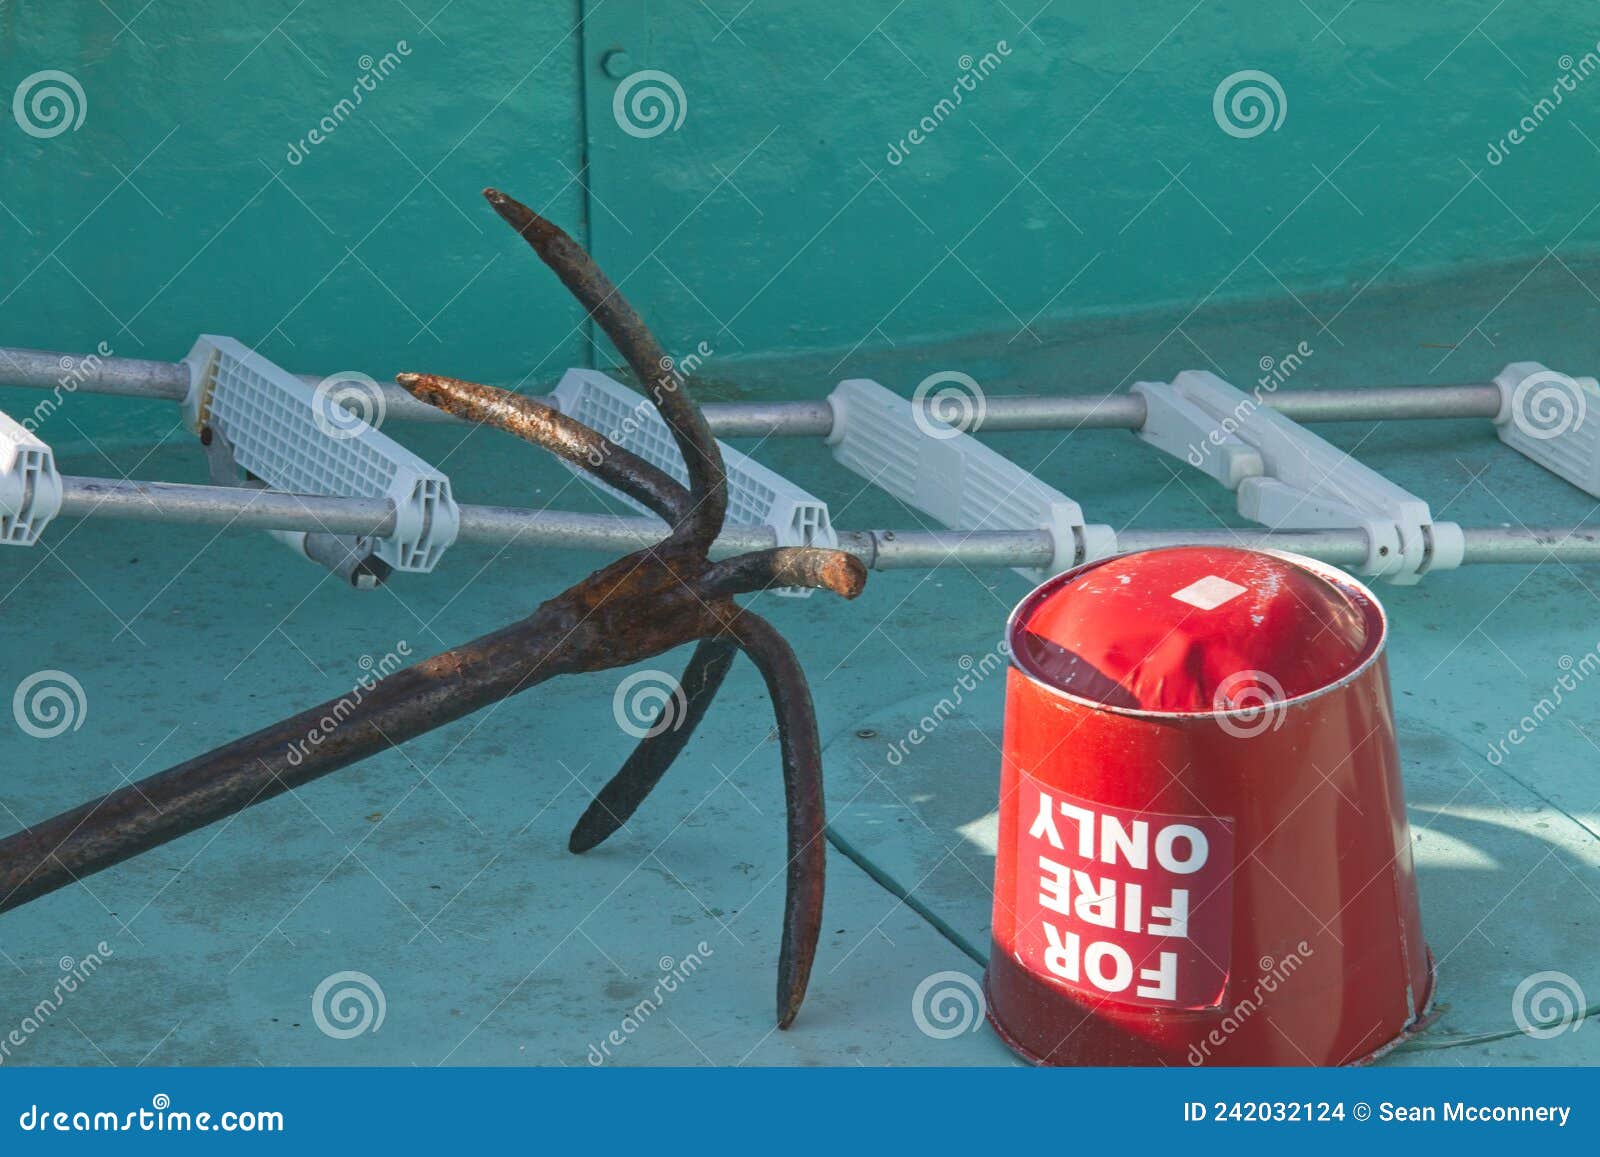 Items You May Find on a Fishing Boat. Stock Photo - Image of pale